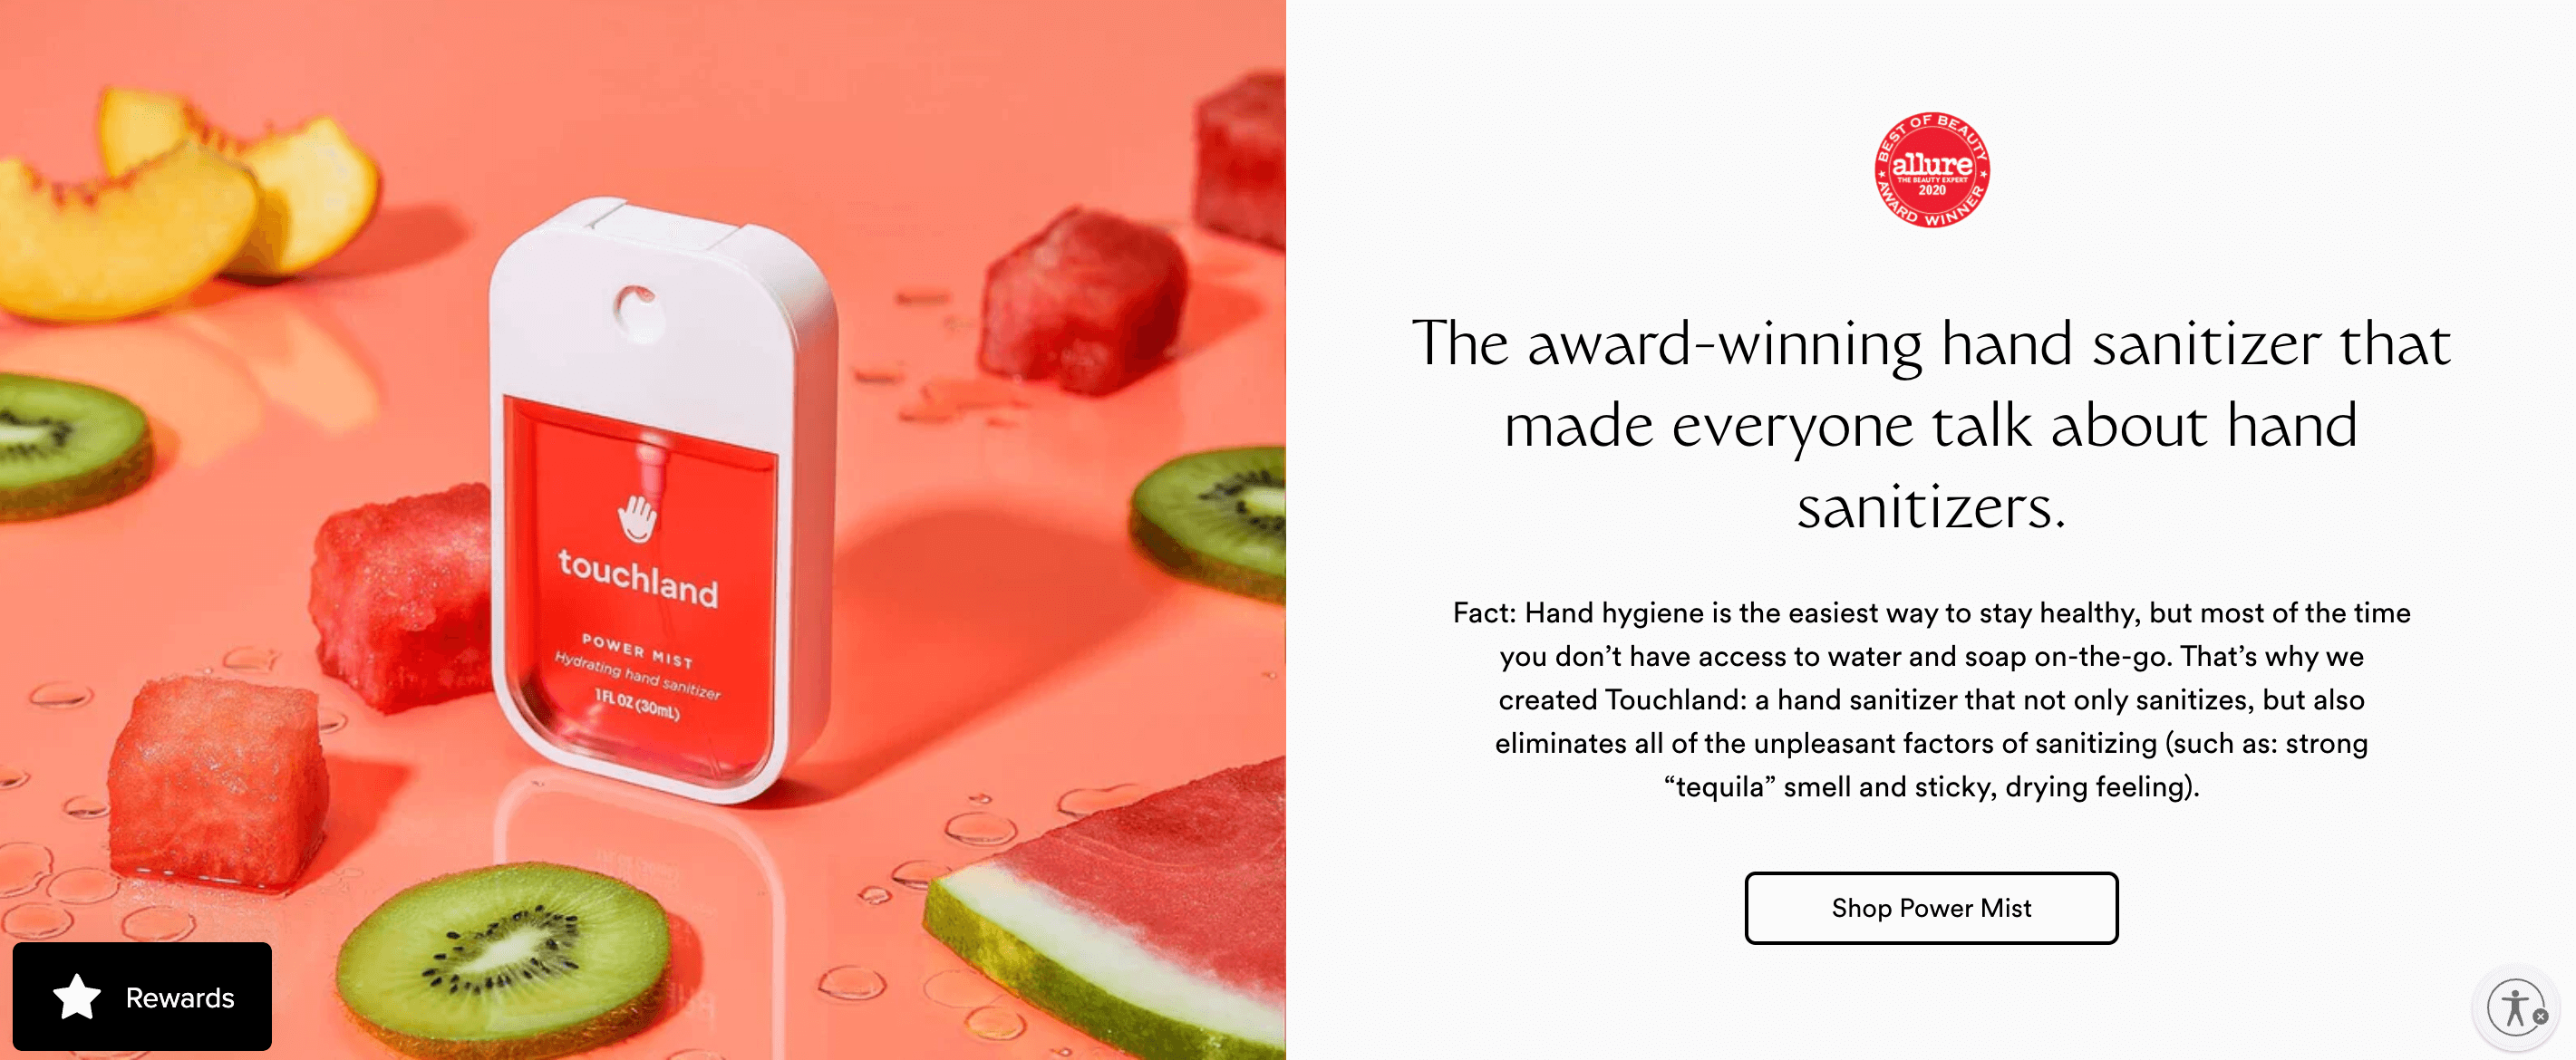 A screenshot of touchland’s homepage showing a product image and description. It shows an image of its pink Power Mist spray hand sanitizer on a light pink surface surrounded by slices of fruit: watermelon, kiwi, and peaches. The text beside the image says: The award-winning hand sanitizer that made everyone talk about hand sanitizers. Fact: Hand hygiene is the easiest way to stay healthy, but most of the time you don’t have access to water and soap on-the-go. That’s why we created Touchland: a hand sanitizer that not only sanitizes, but also eliminates all of the unpleasant factors of sanitizing (such as: strong “tequila” smell and sticky, drying feeling). Shop Power Mist. 